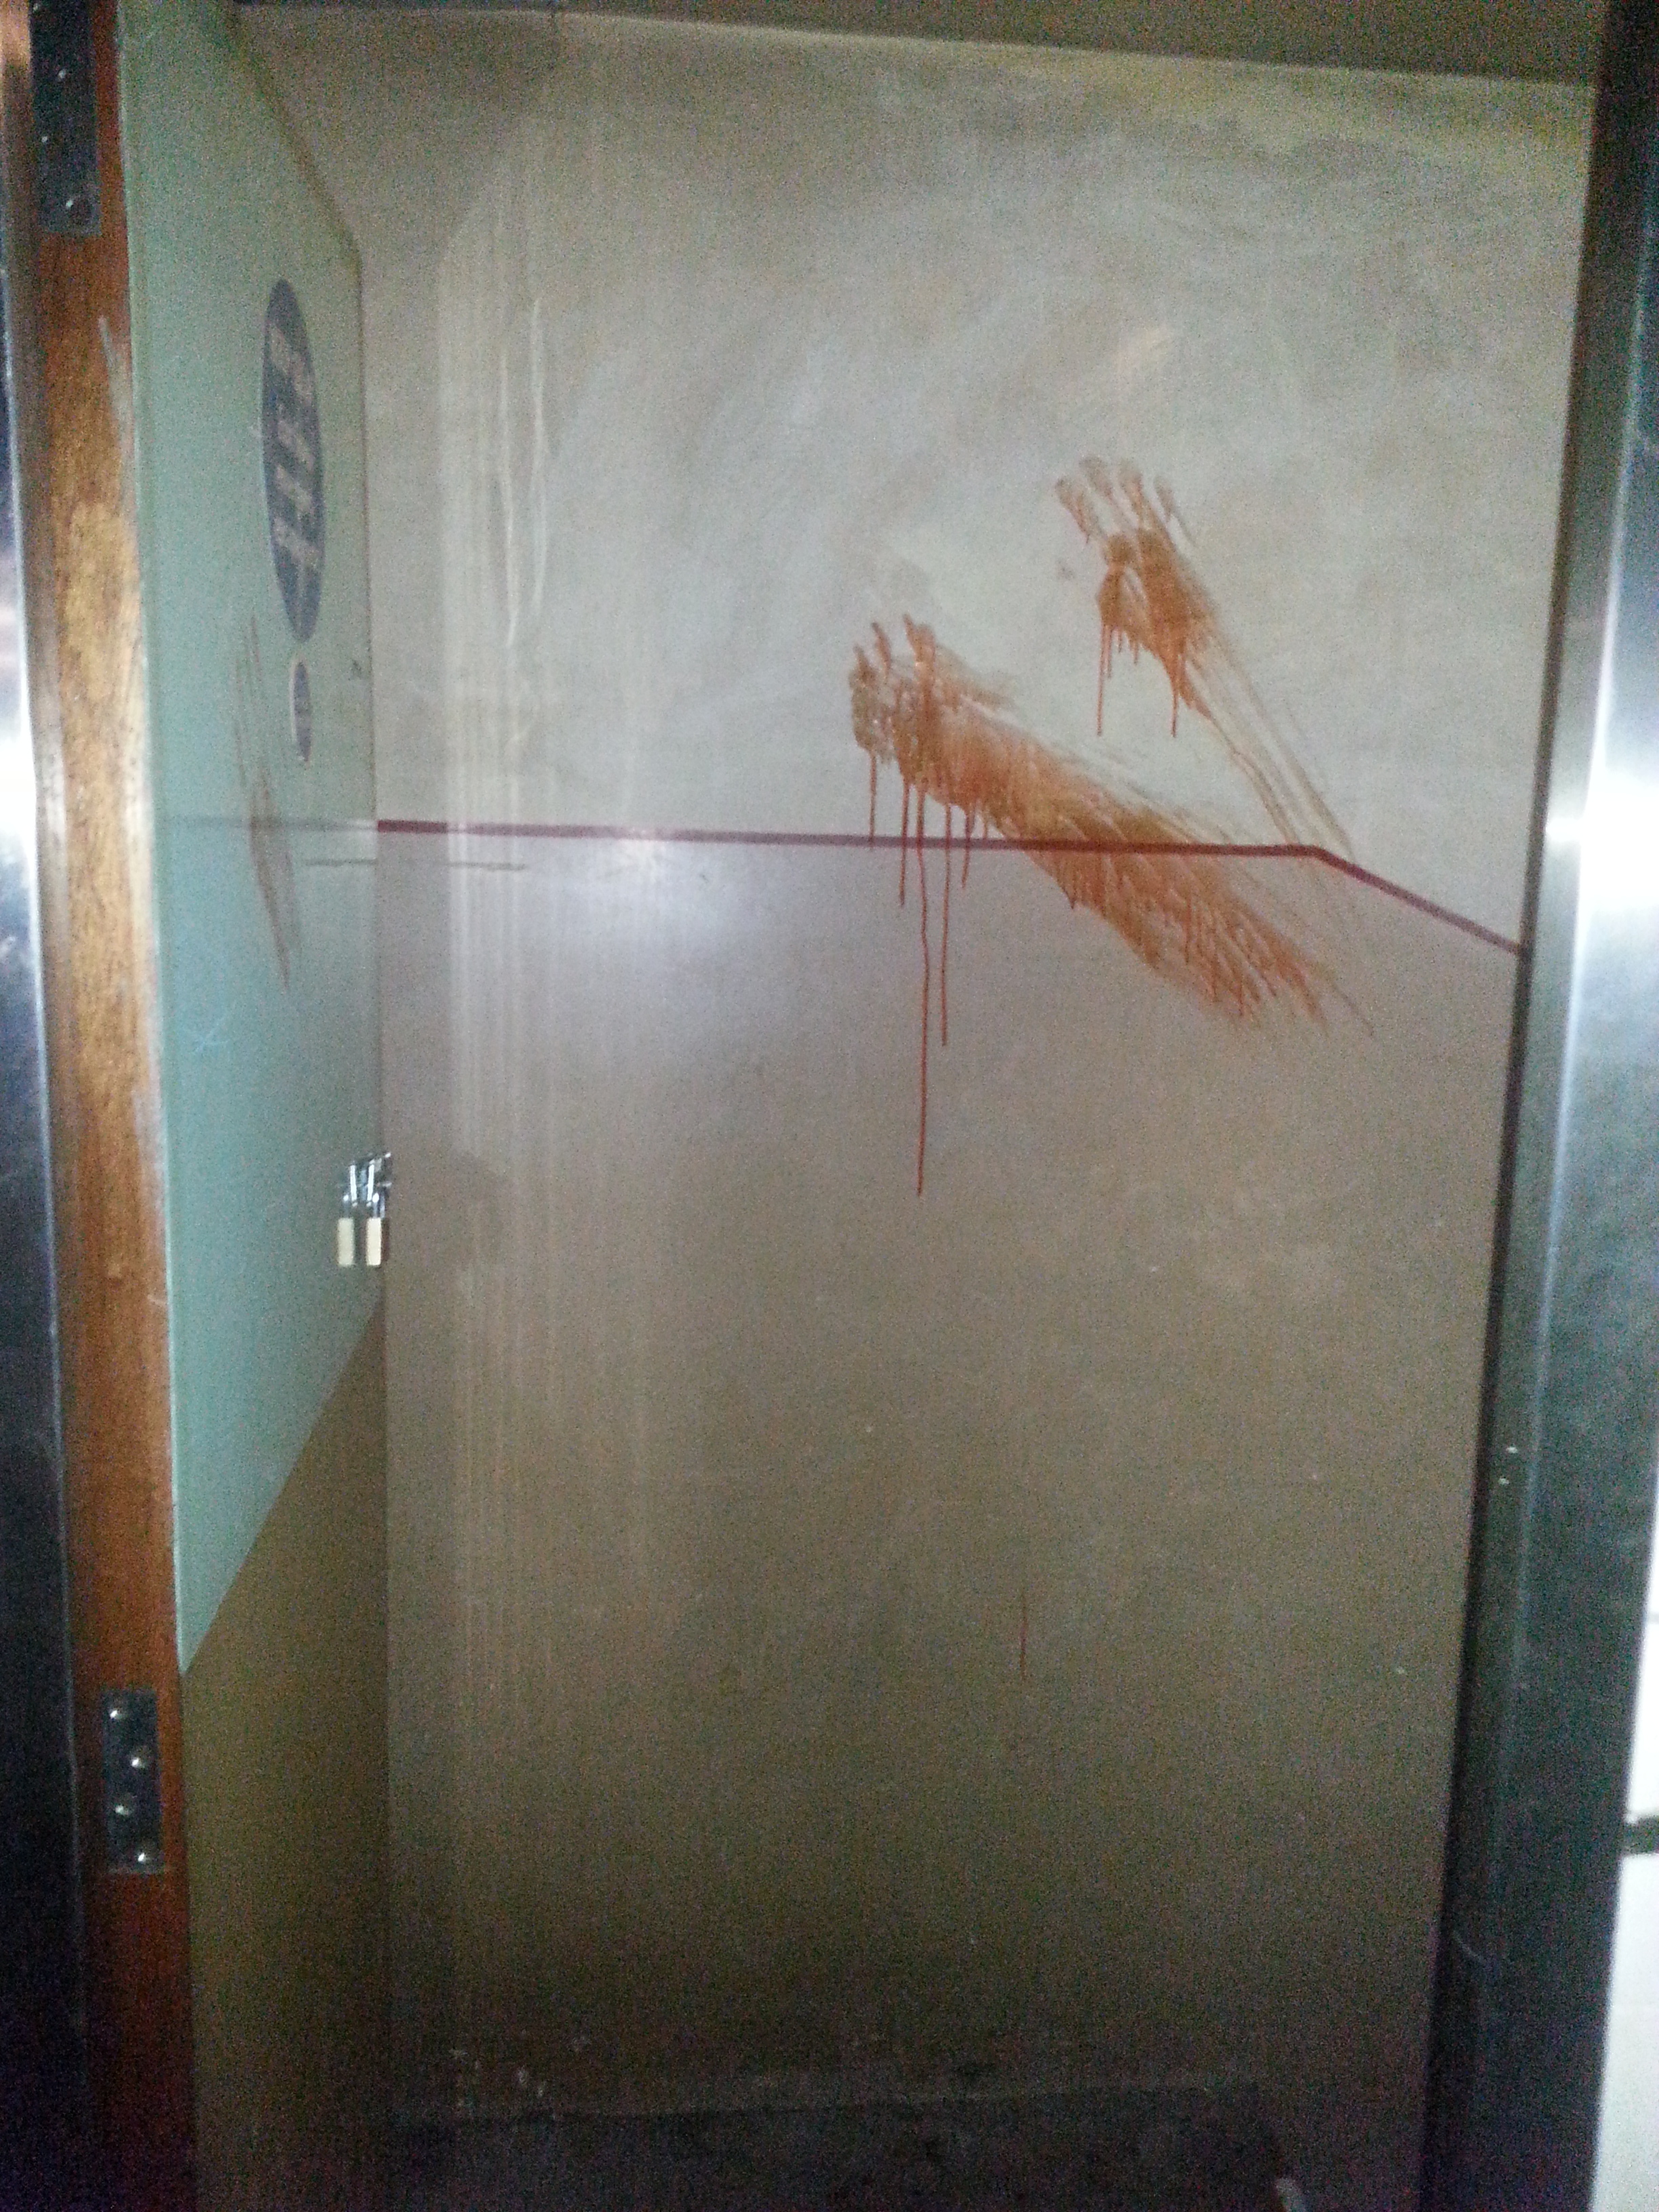 Fake blood hand prints leading down to the basement.  